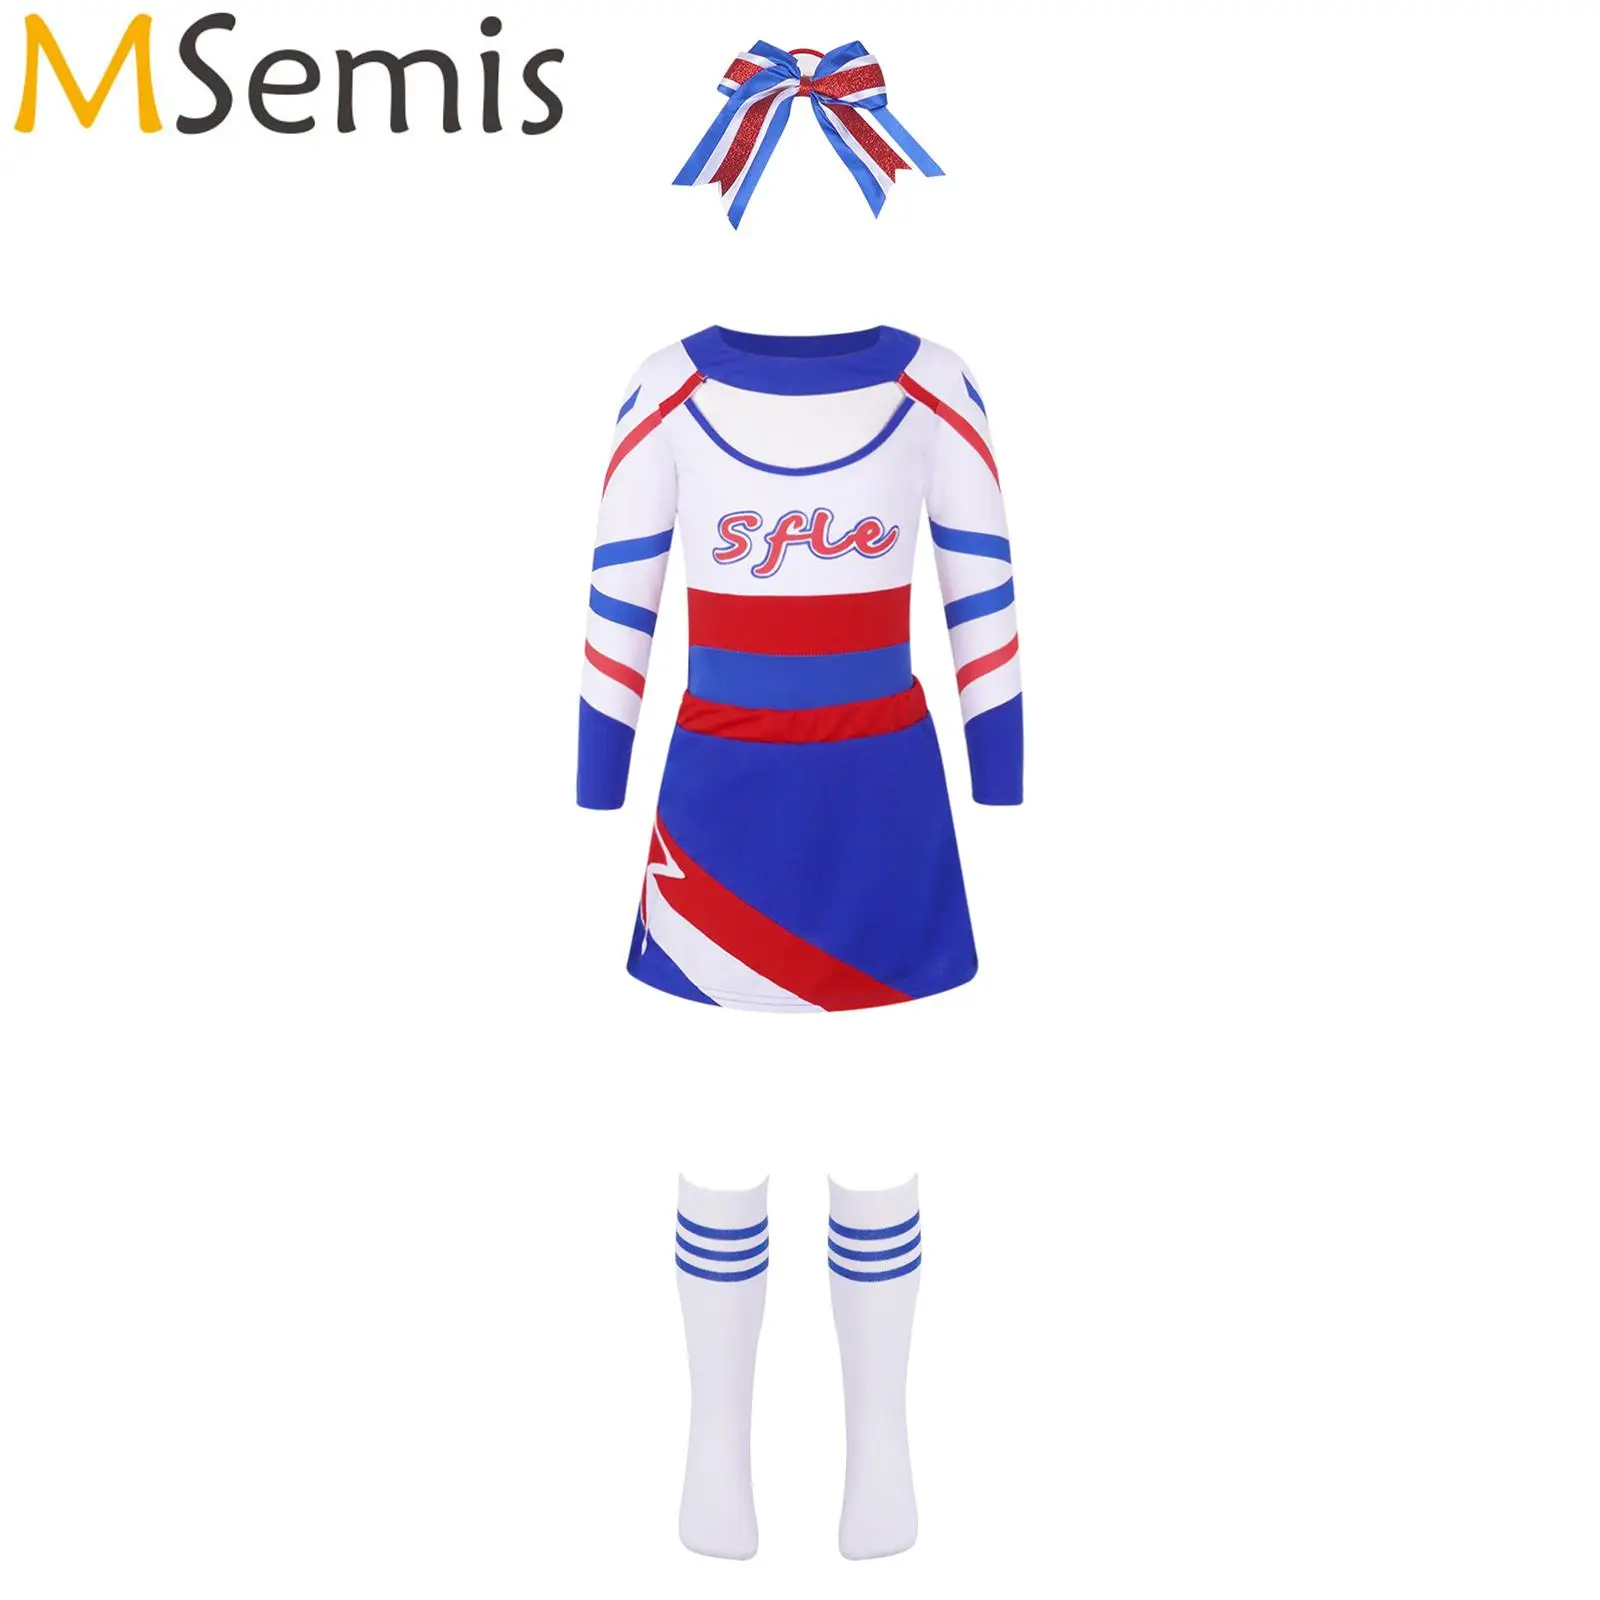 

Kids Girls Cheerleading Outfit Long Sleeve Cheerleader Costume Headgear and Stockings Suit for Performance Dancing Cheer Cosplay